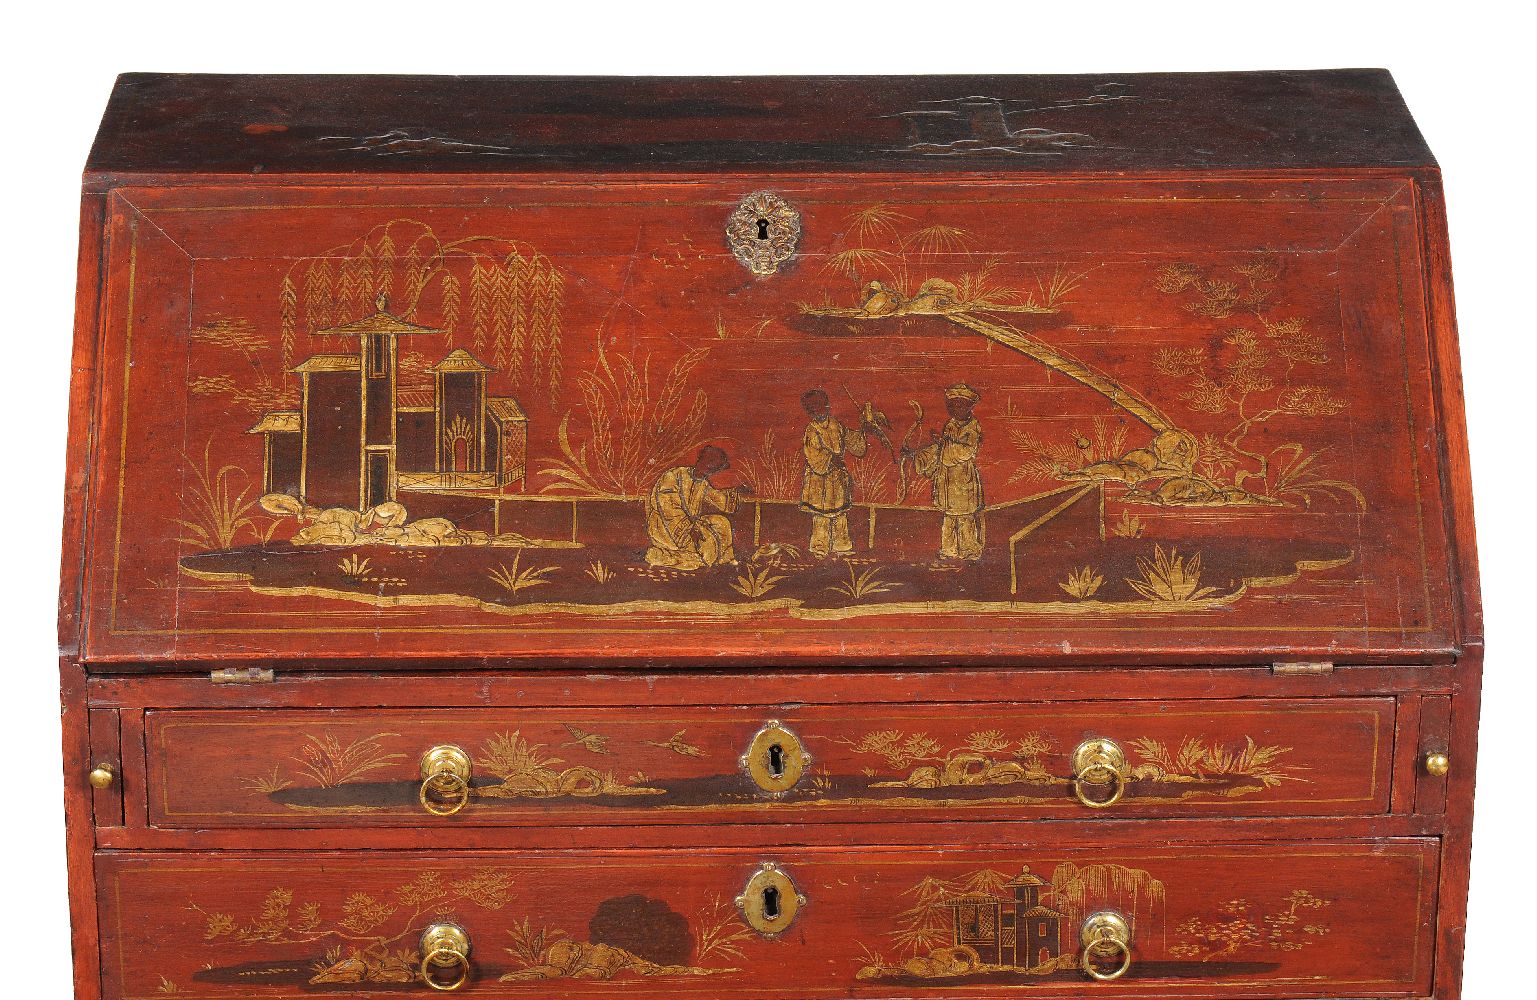 A George II red lacquer and gilt Chinoiserie decorated bureau, circa 1740 the decoration depicting - Image 3 of 5